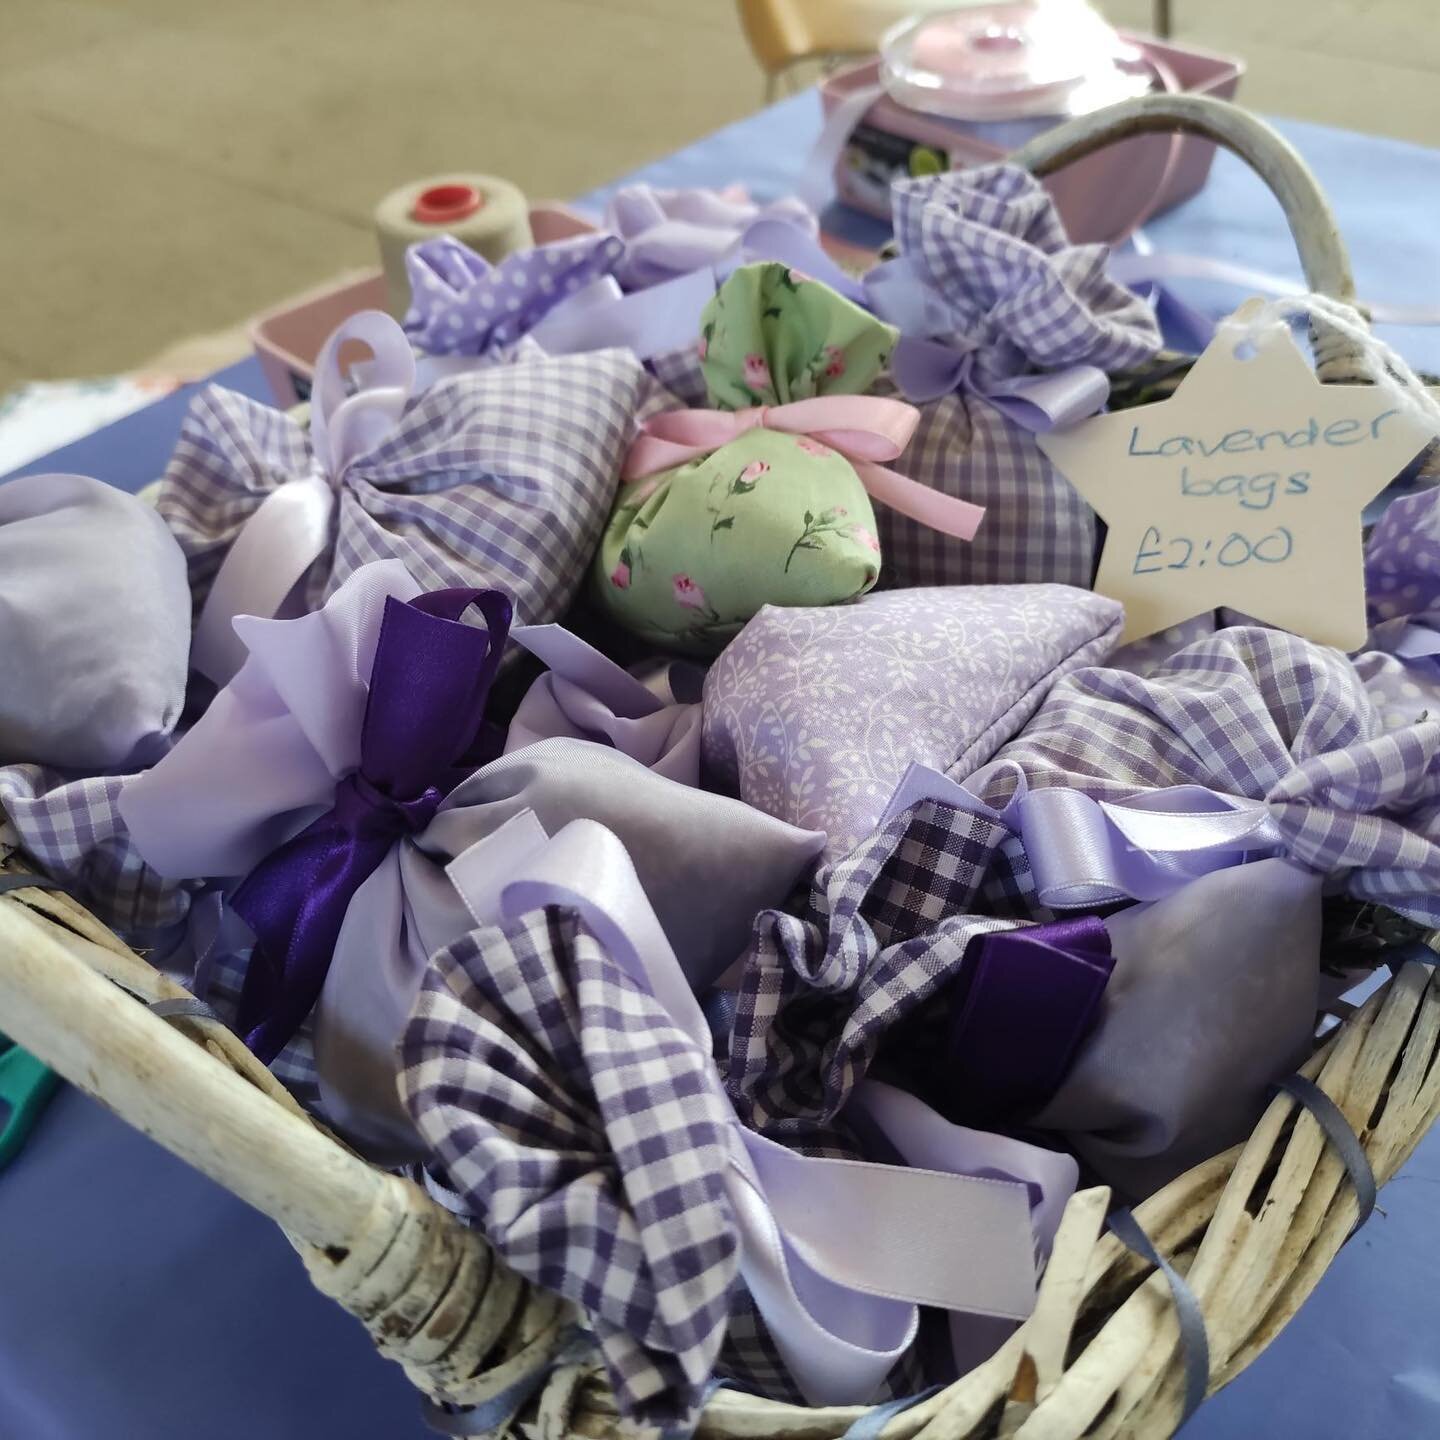 Today join us for the first of our Lavender Bag workshops from 11am-12pm and 2pm-4pm. Make your own or buy a ready made bag handmade by our flower guild! 

Can't come down today? Join us next Thursday for more workshops or find more events at portcat